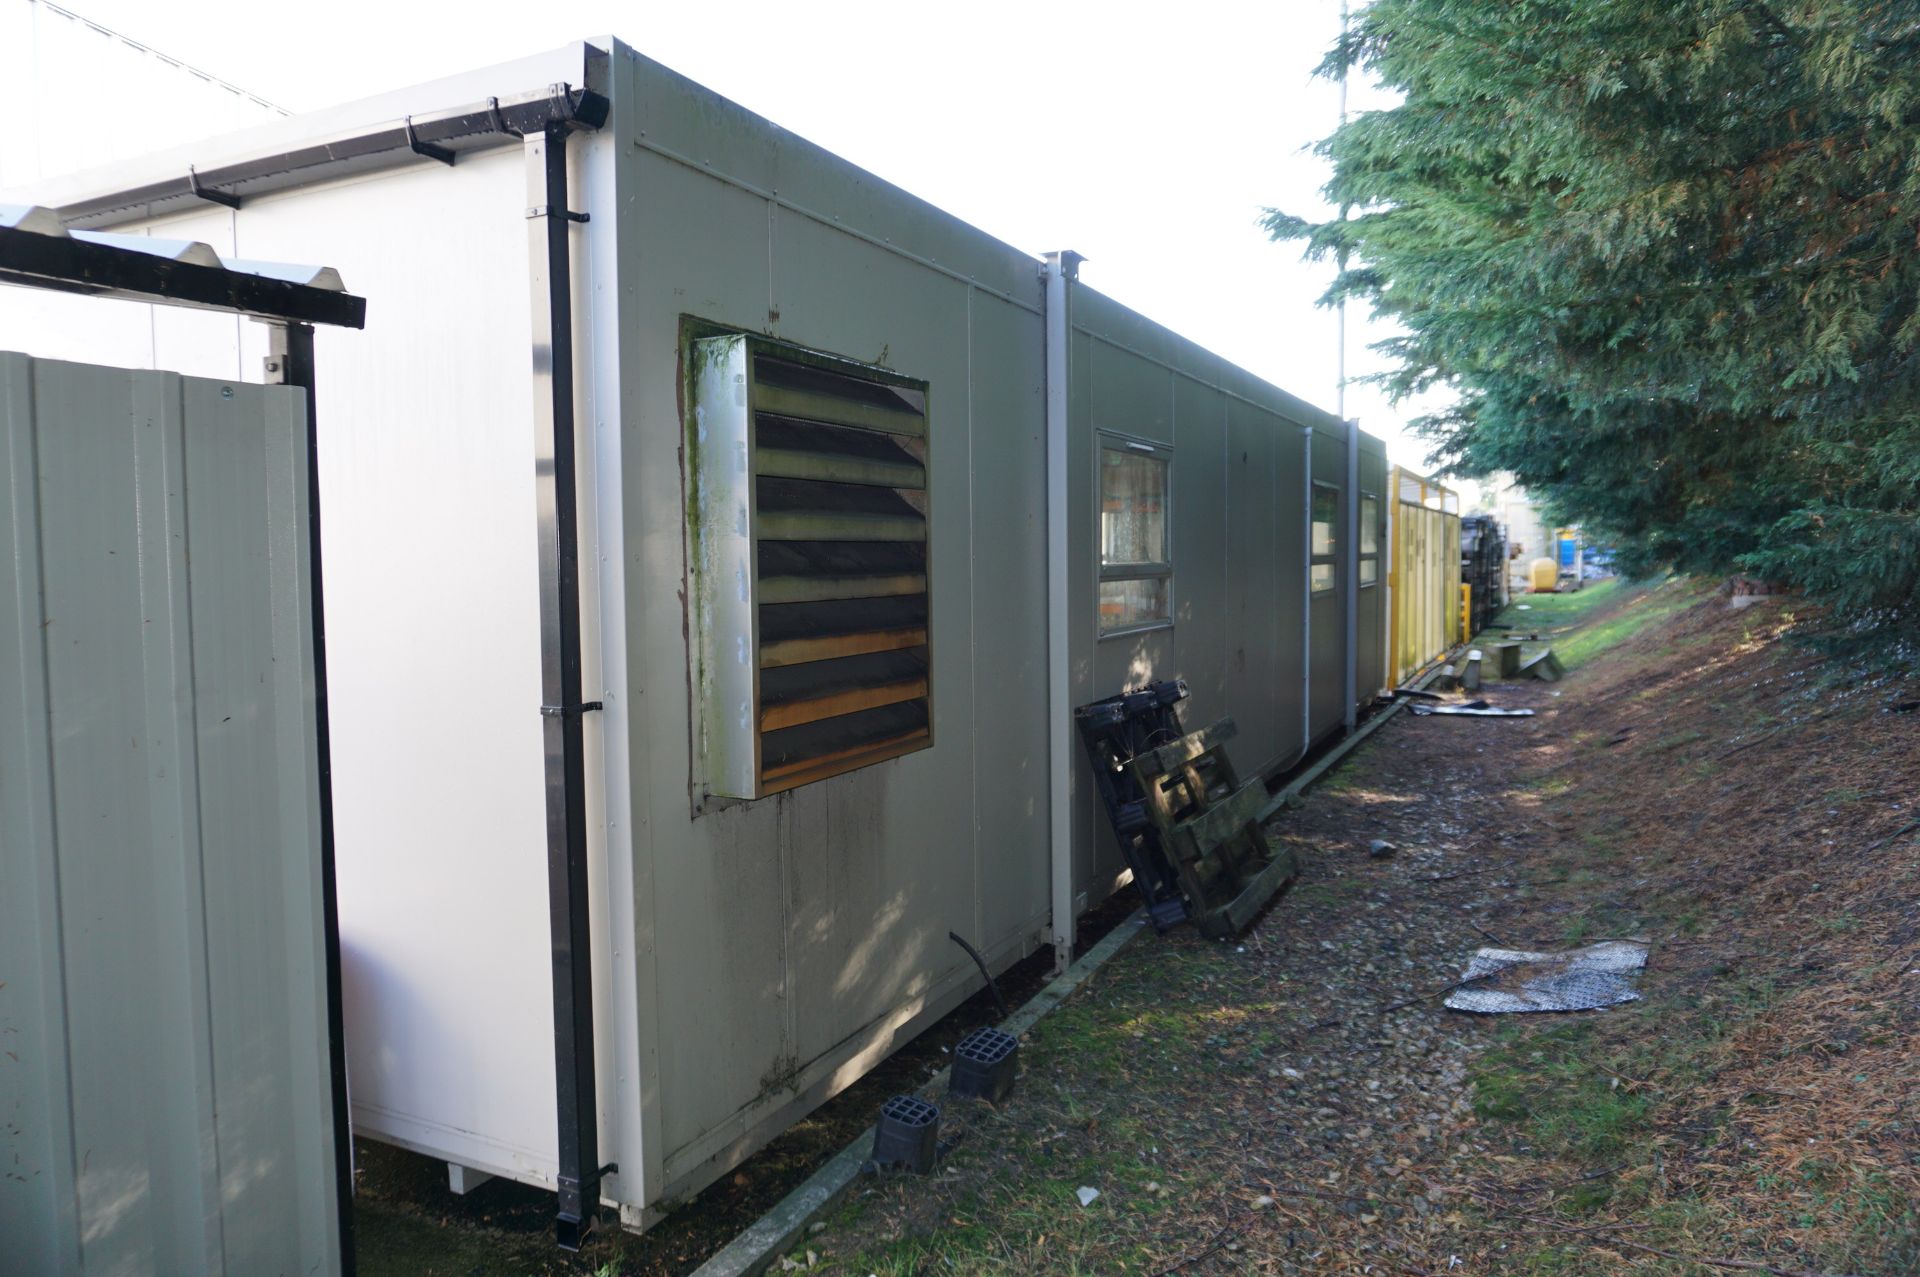 Jack legged portacabin with bespoke in built testing room with air extraction system - Image 4 of 4